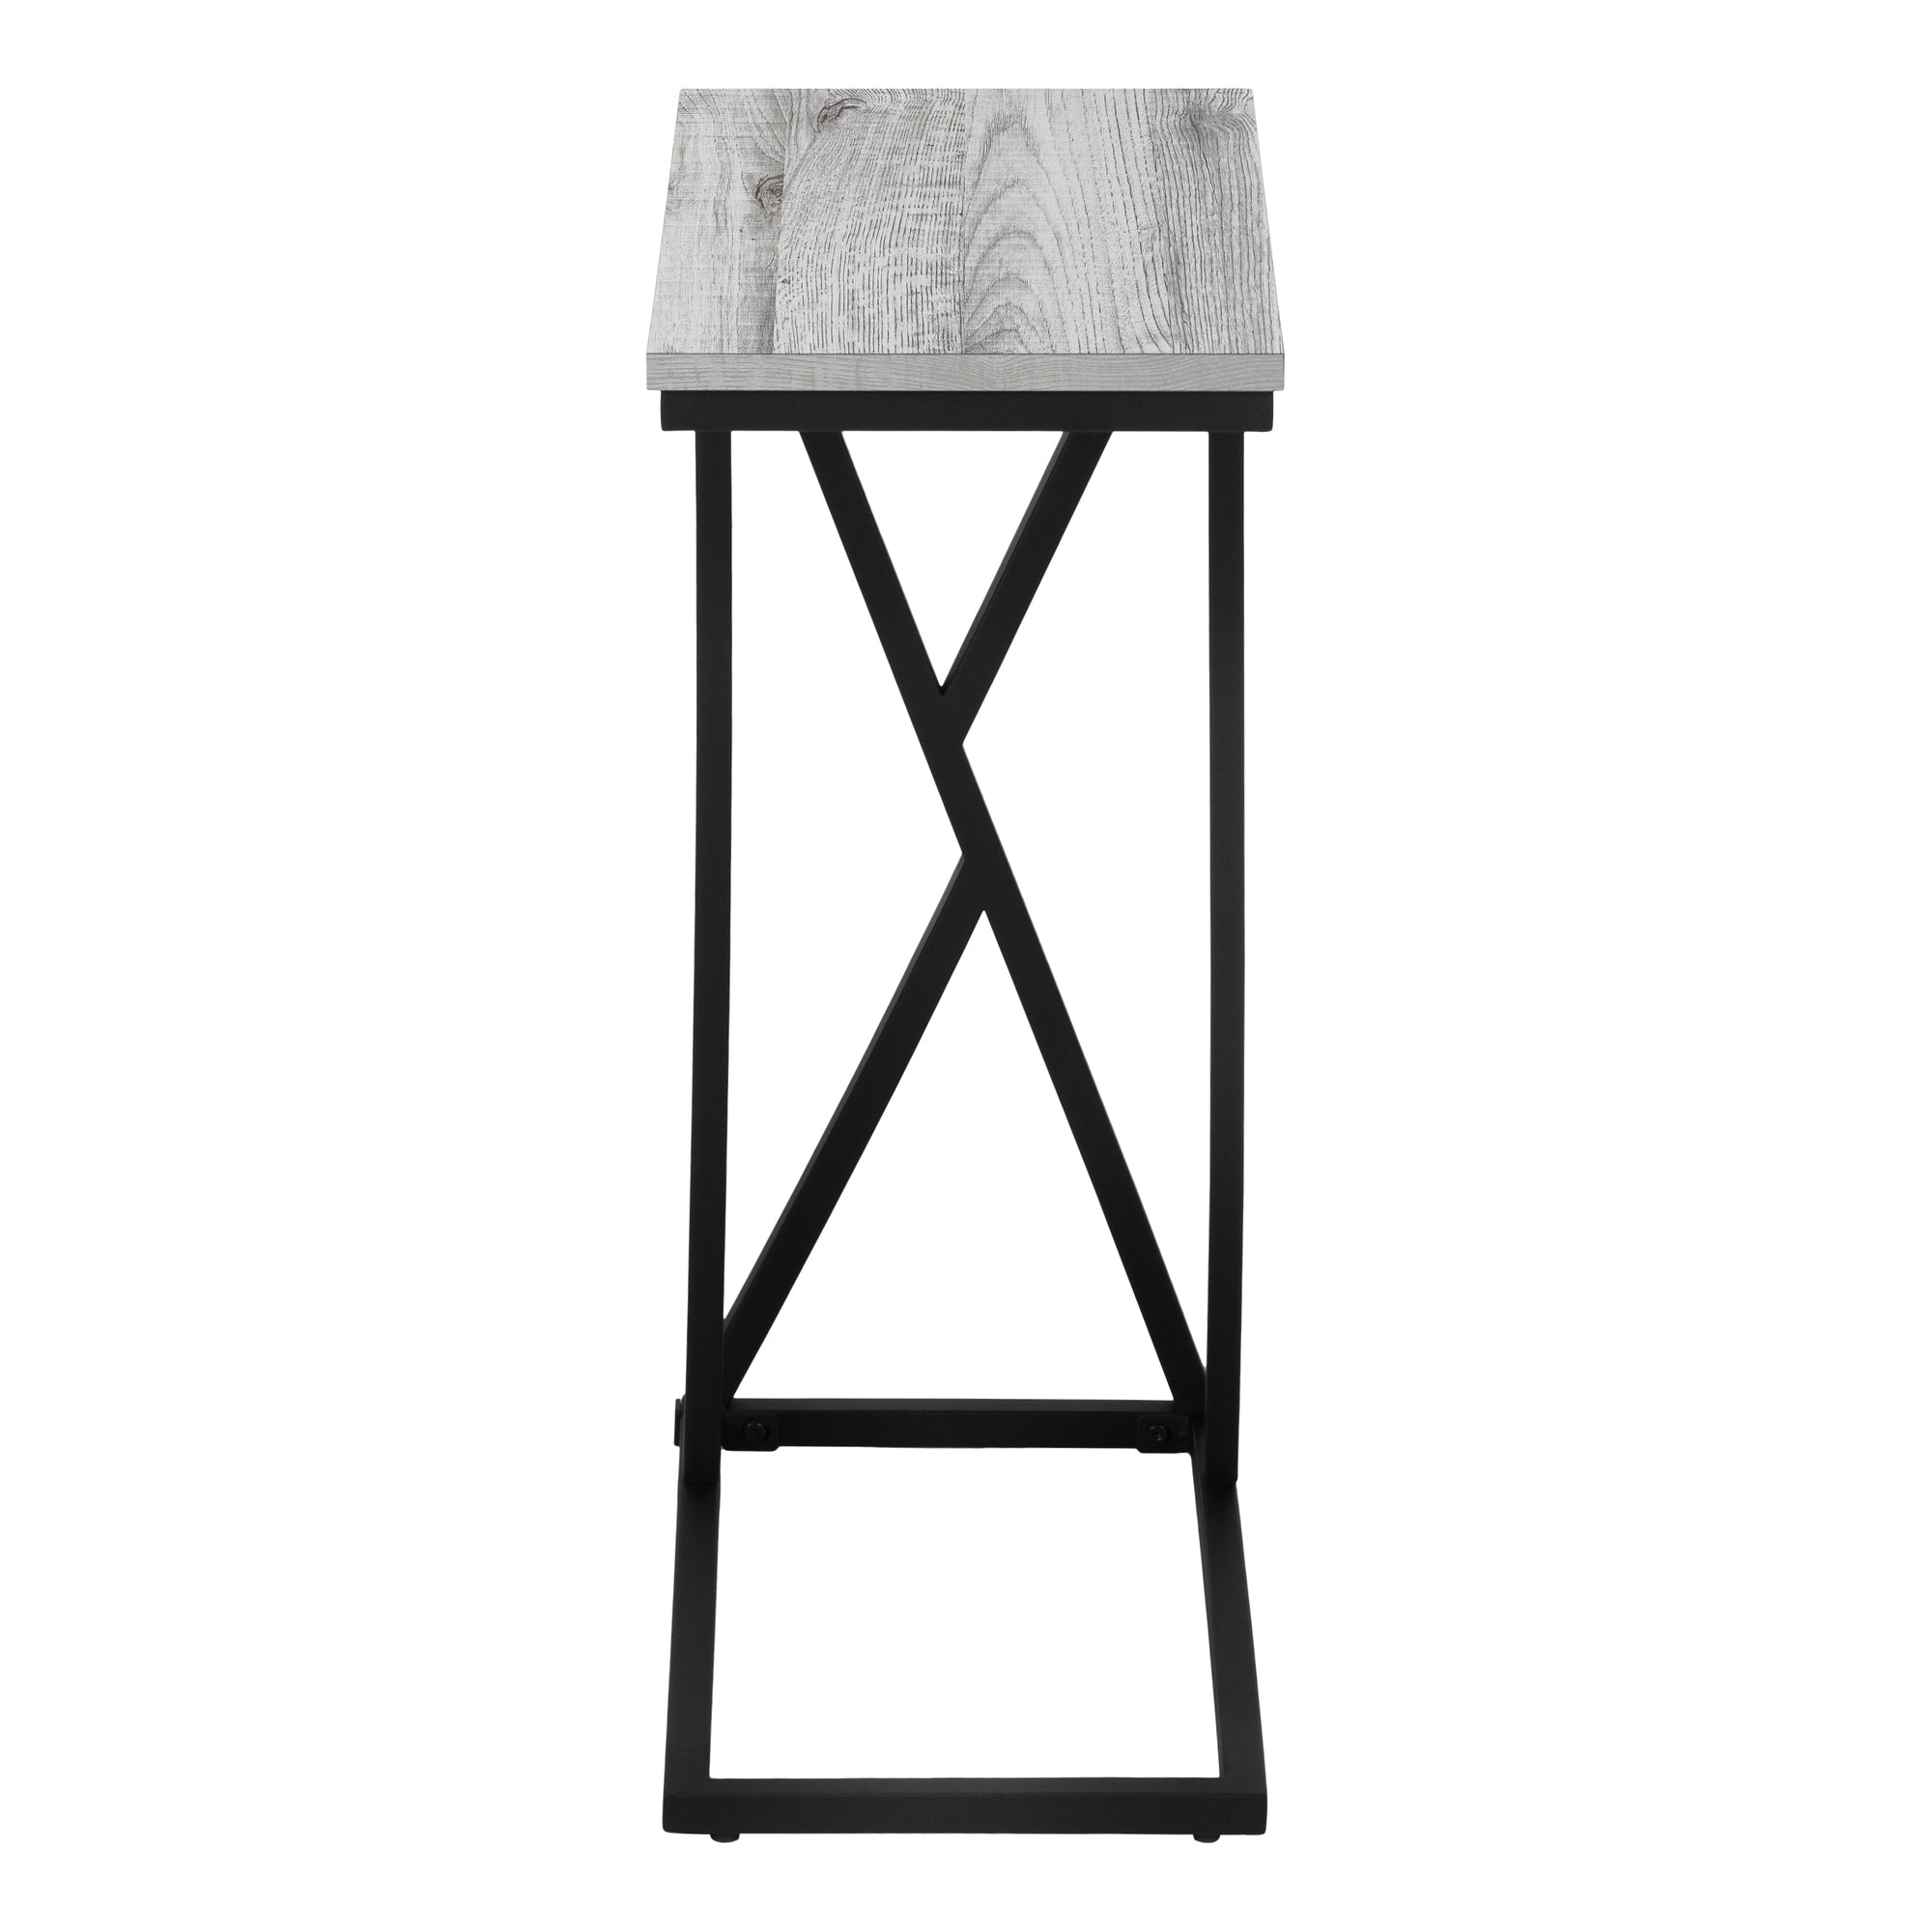 MN-853248    Accent Table, C-Shaped, End, Side, Snack, Living Room, Bedroom, Metal Legs, Laminate, Grey, Black, Contemporary, Modern